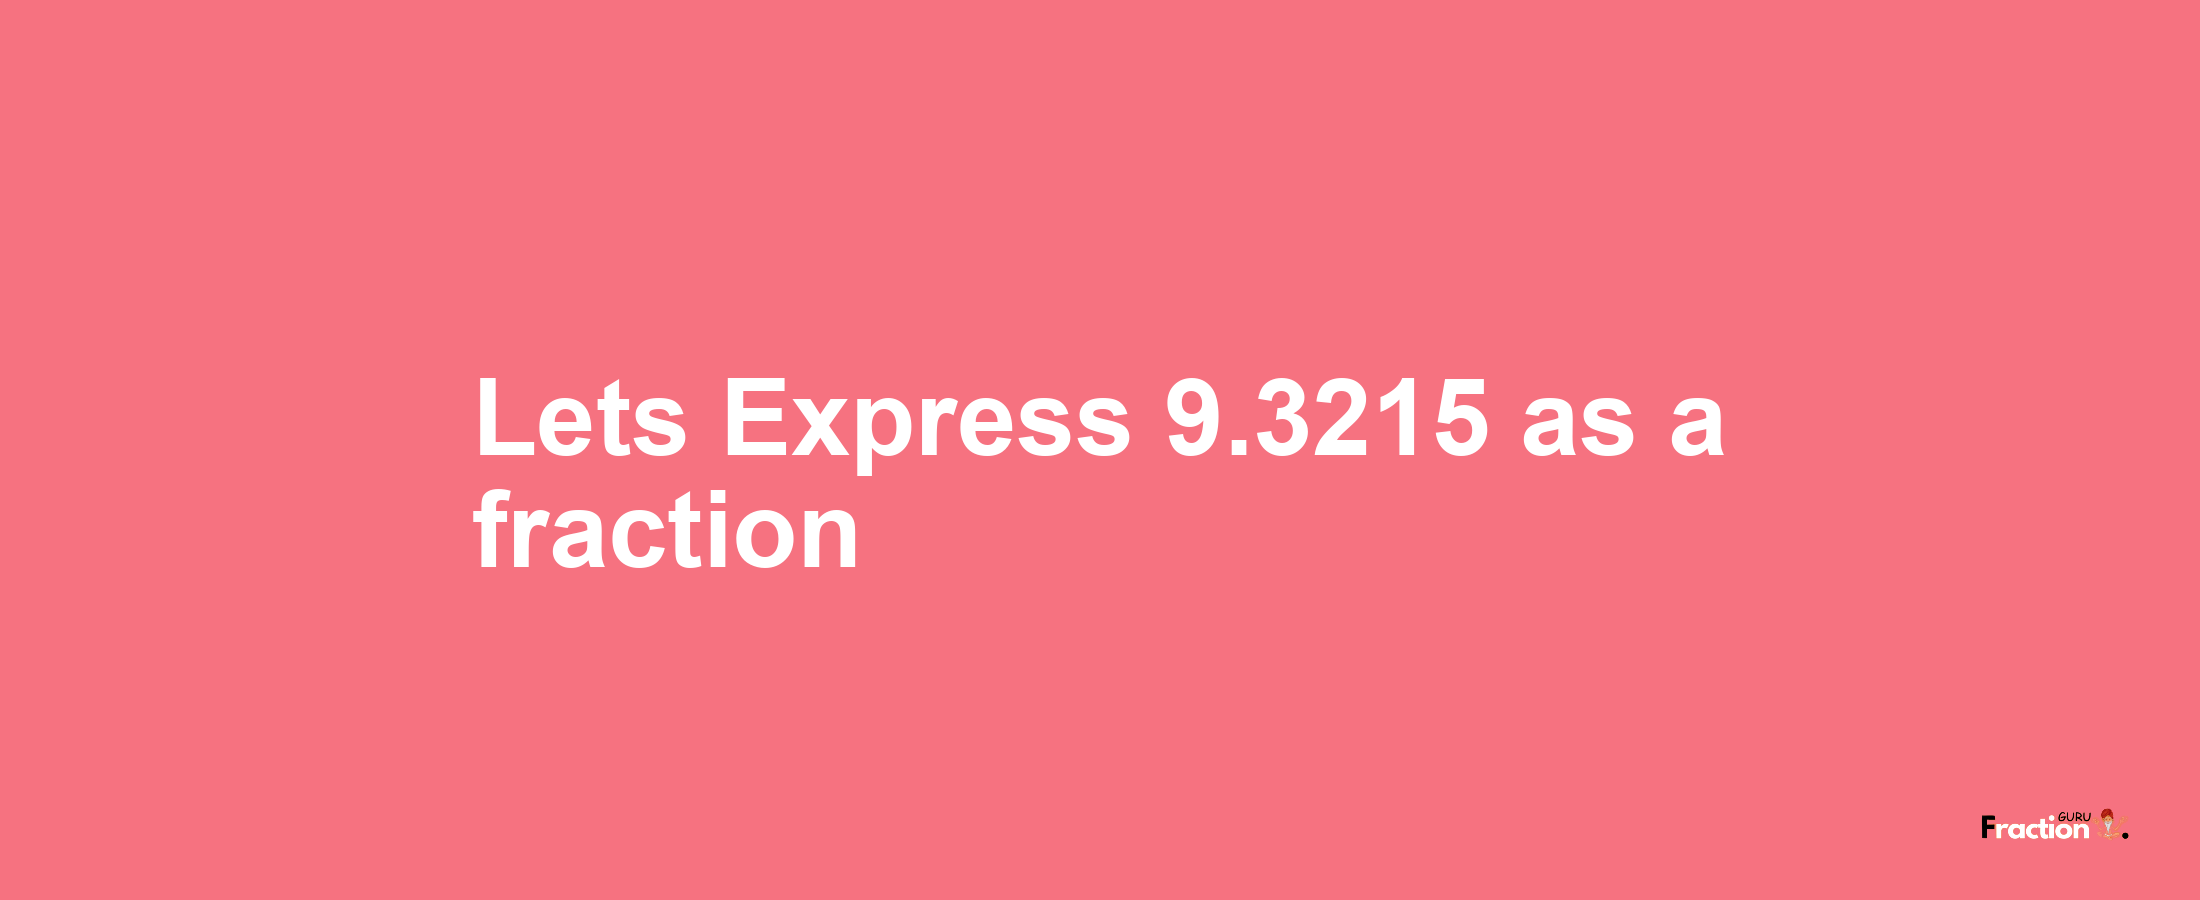 Lets Express 9.3215 as afraction